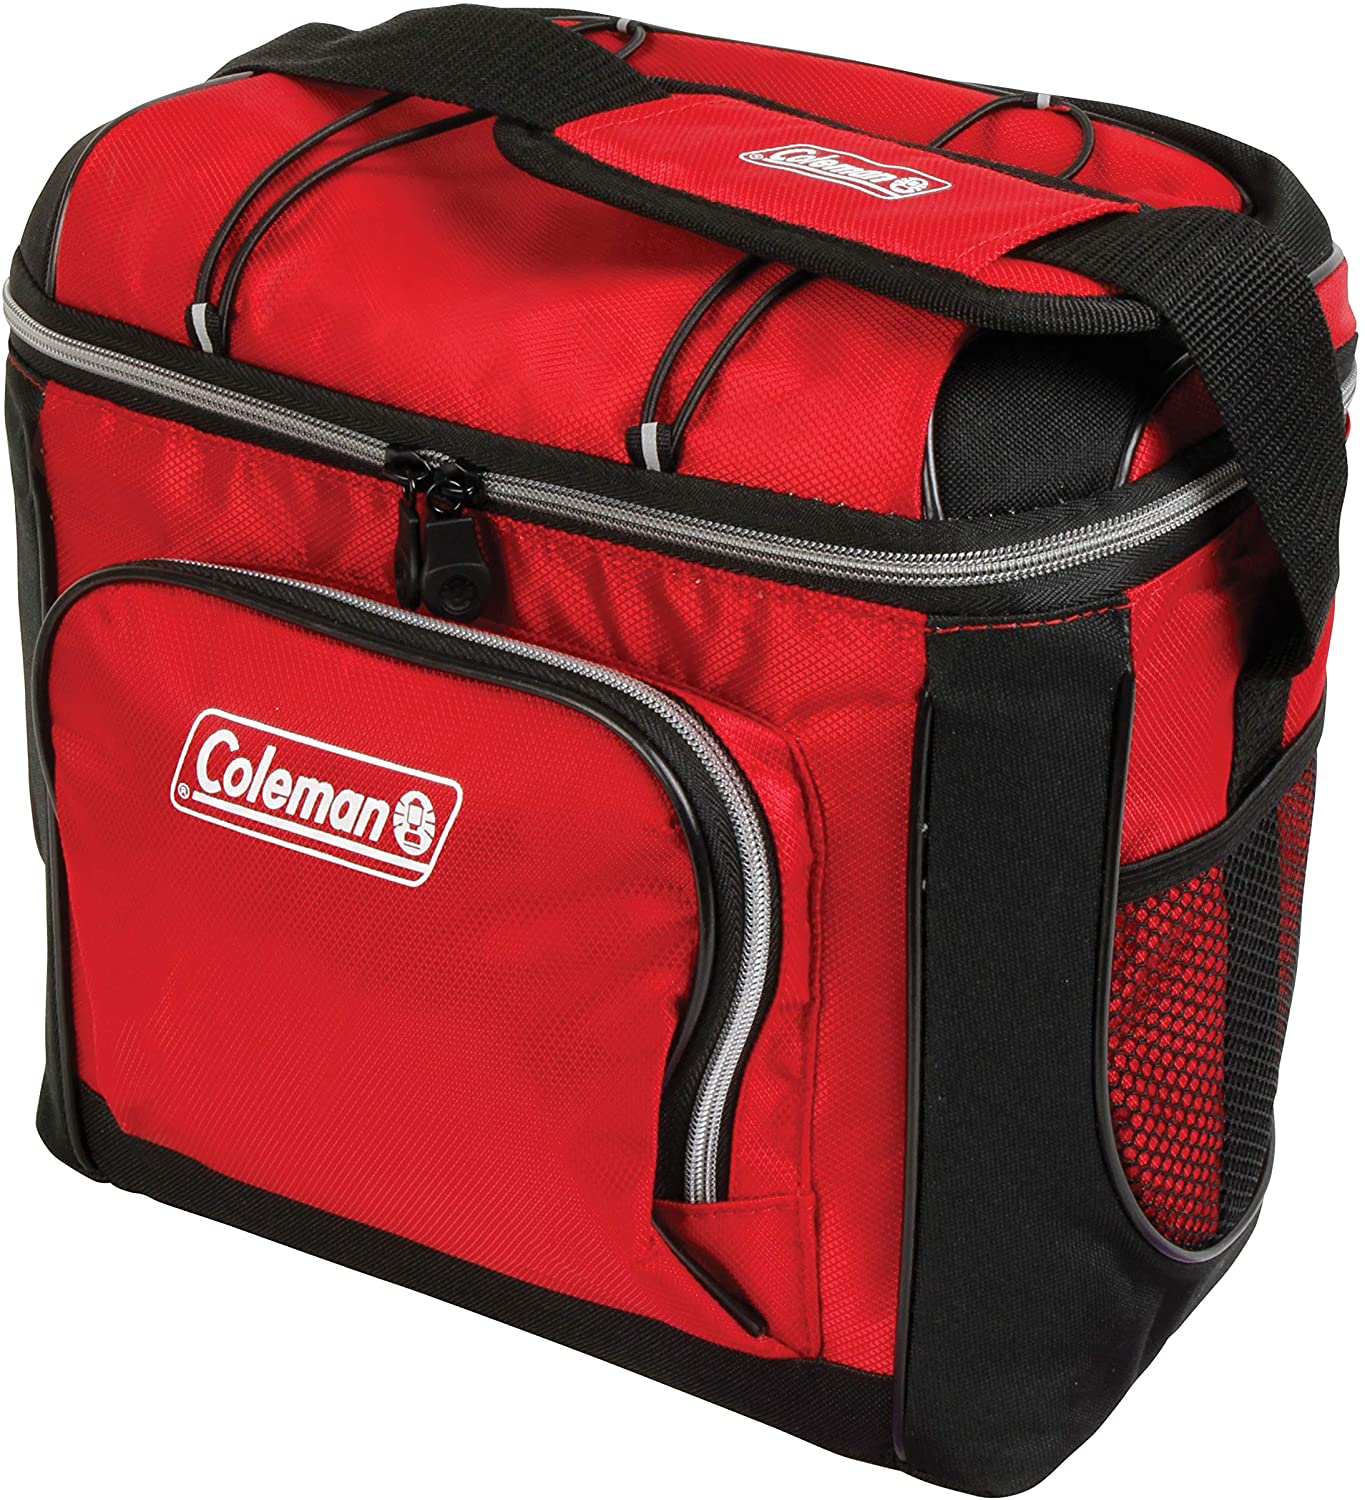 Coleman 9 Cans Soft-Sided Cooler, Red - image 3 of 5